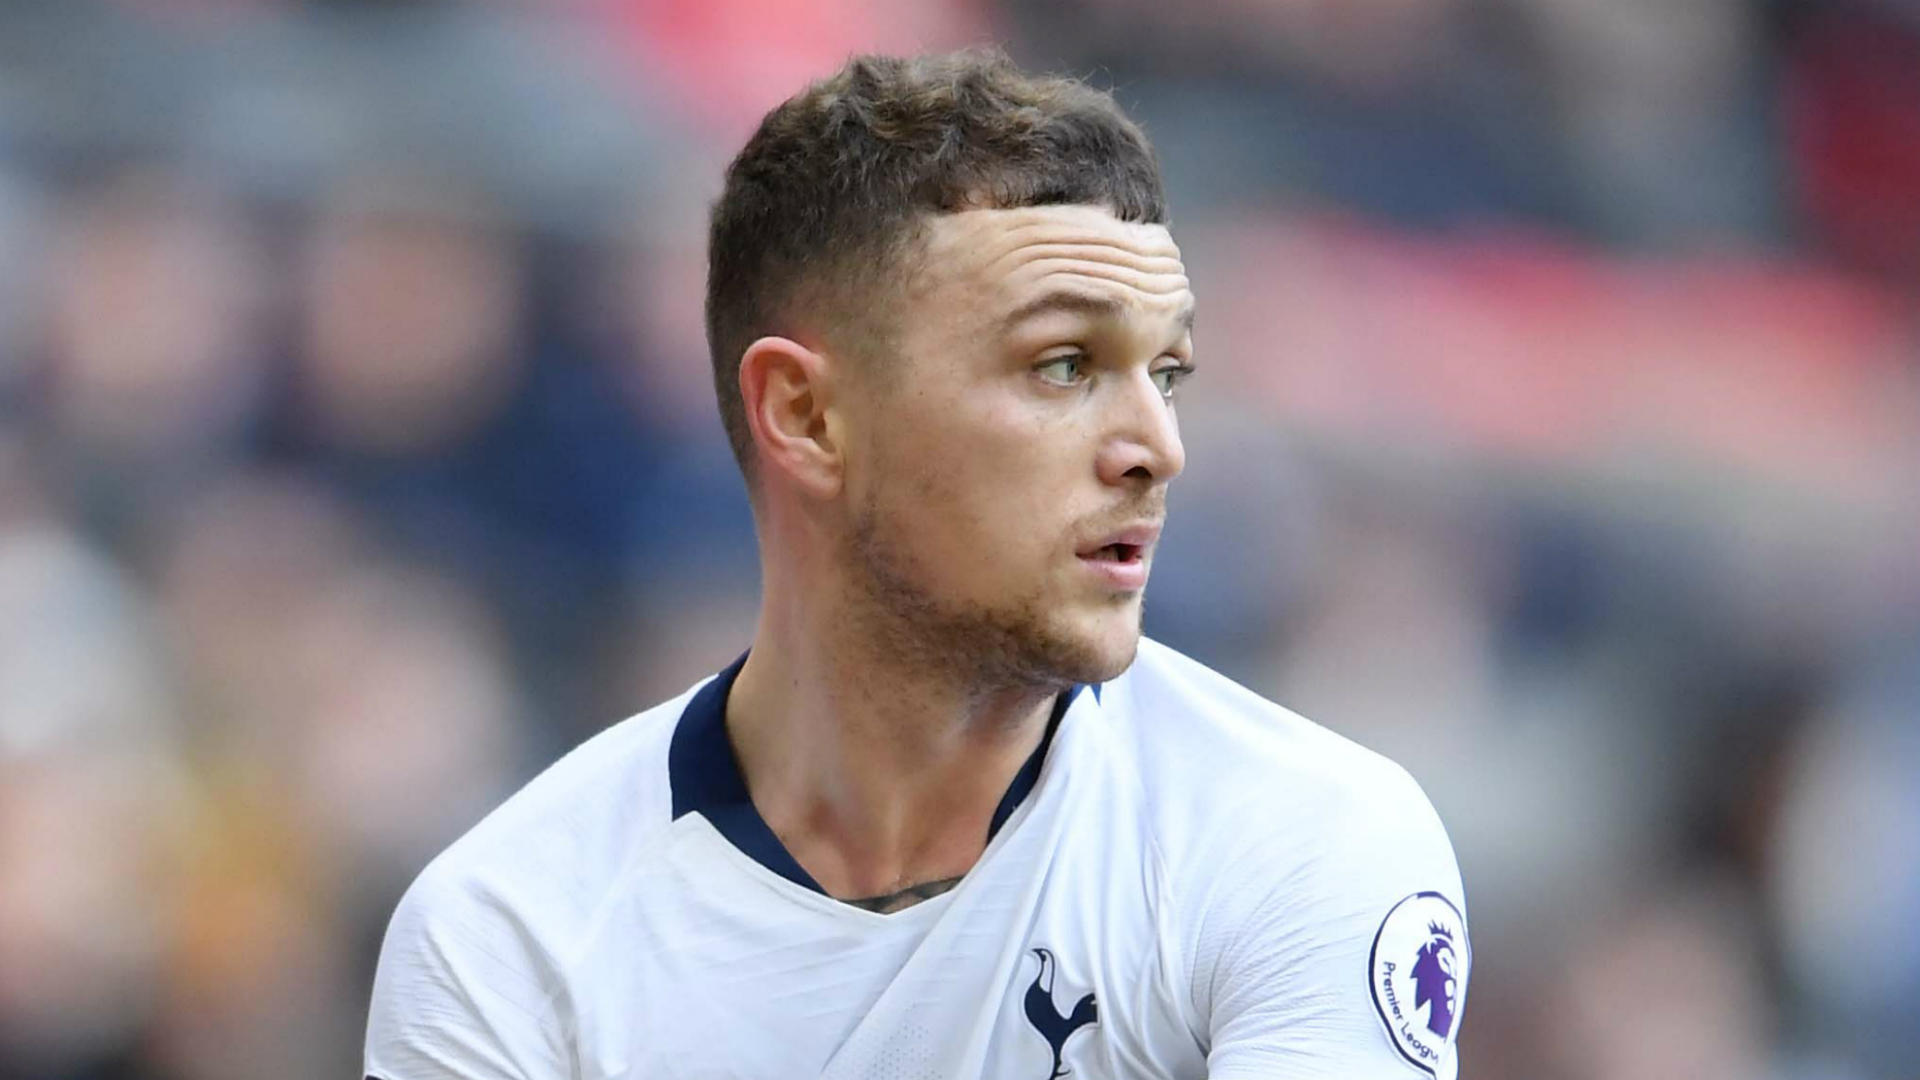 Kieran Tripper has not enjoyed the best of seasons for Tottenham, but he does not blame his World Cup exploits for his loss of form.